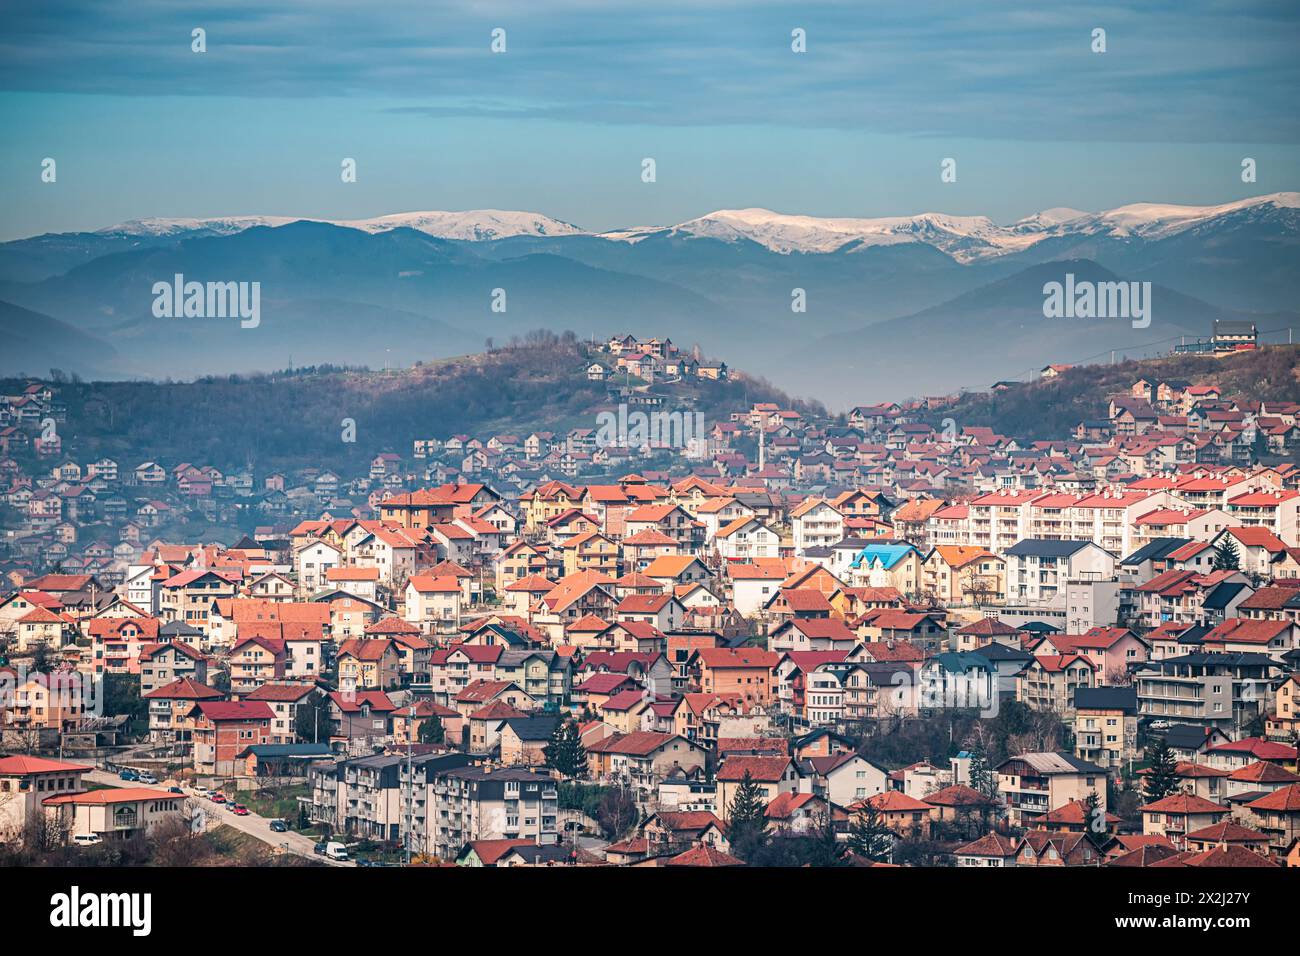 scenic beauty of Sarajevo's cityscape, where old-world charm meets modern architecture against the backdrop of the Balkan mountains. Stock Photo